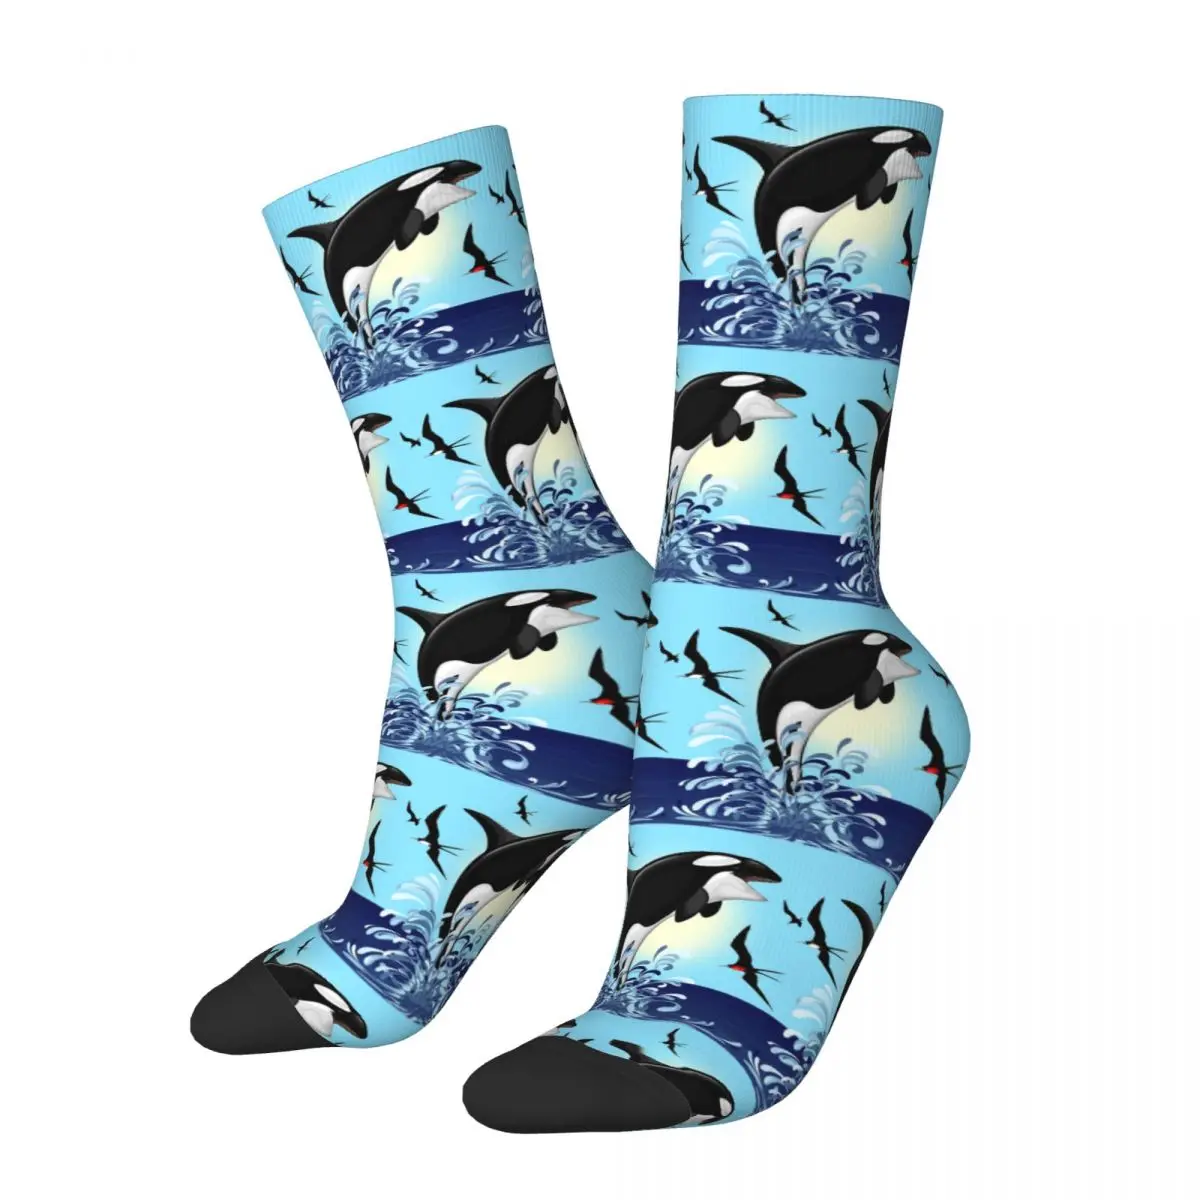 

Orca Killer Whale Jumping Out The Ocean Socks Harajuku Super Soft Stockings All Season Long Socks Accessories for Unisex Gifts